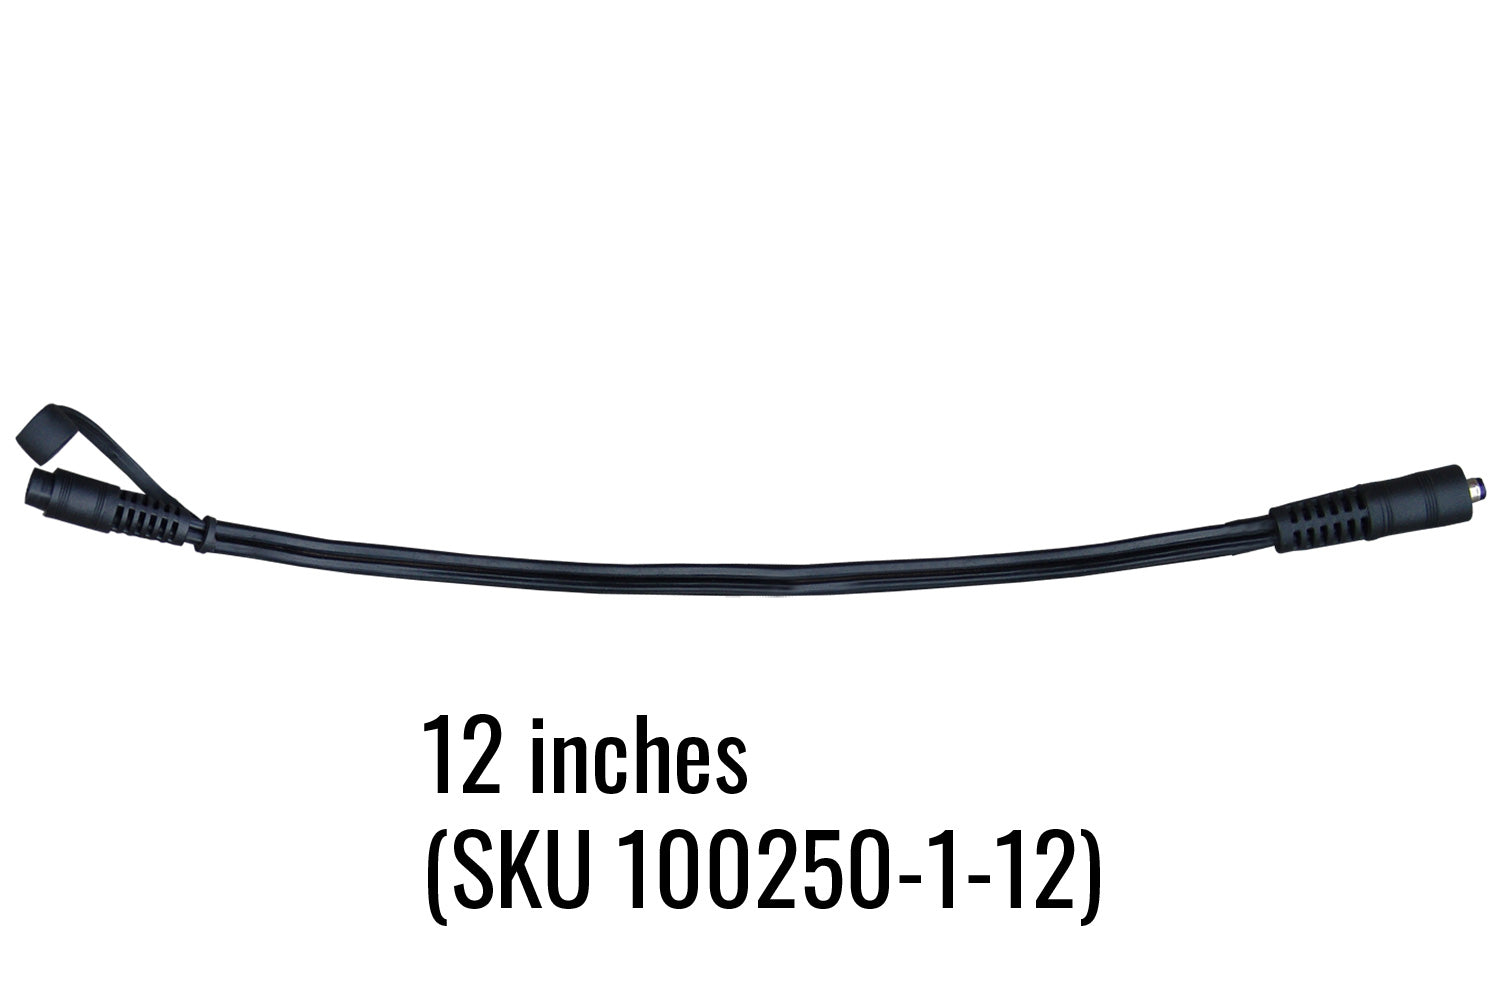 12 inch extension cord